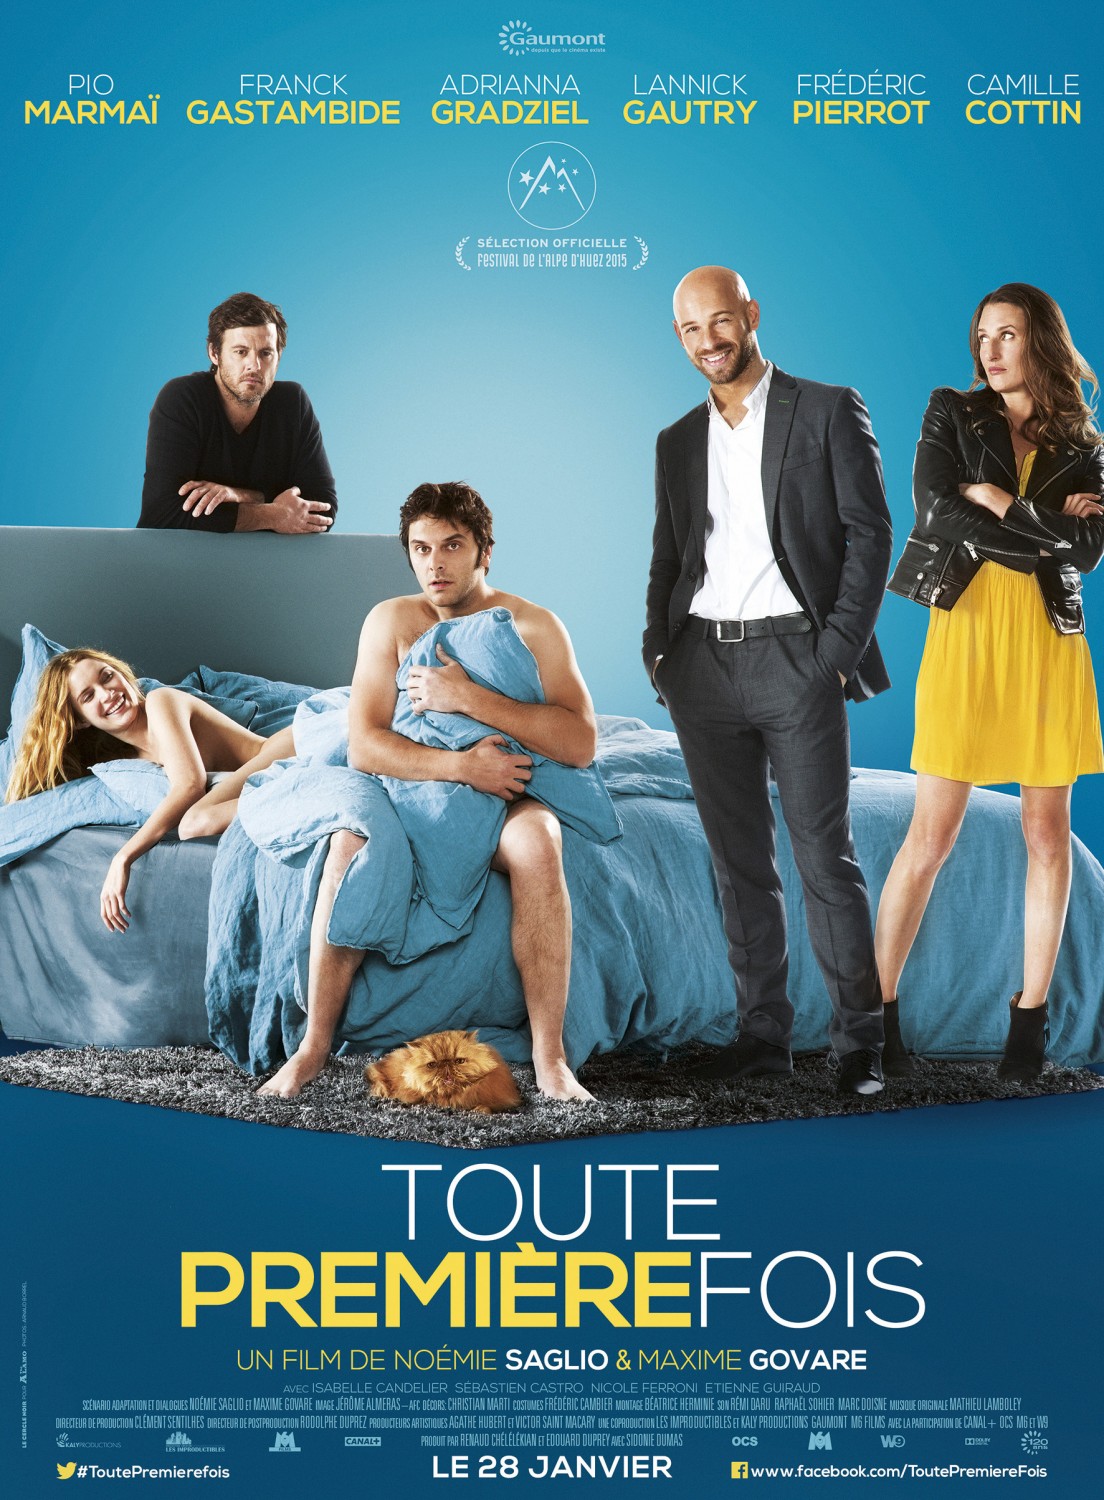 Extra Large Movie Poster Image for Toute première fois 